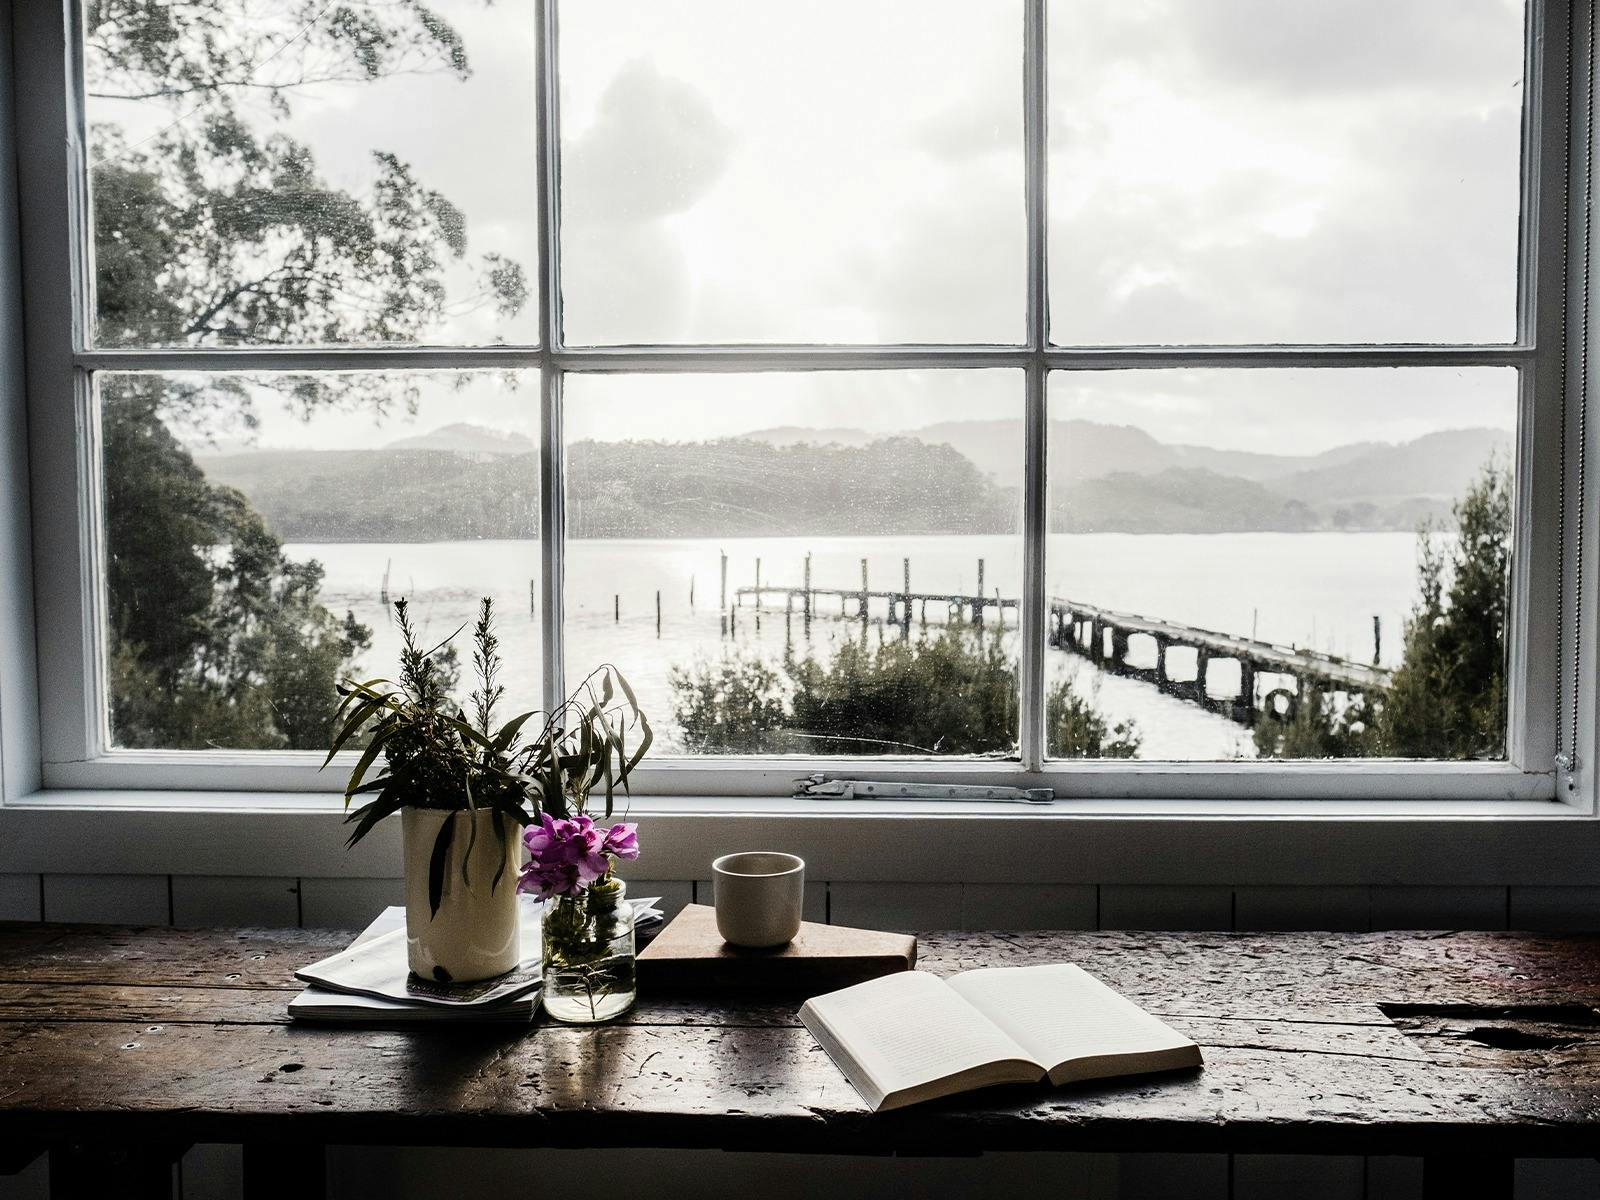 A picture frame window looking out onto the bay and jetty.